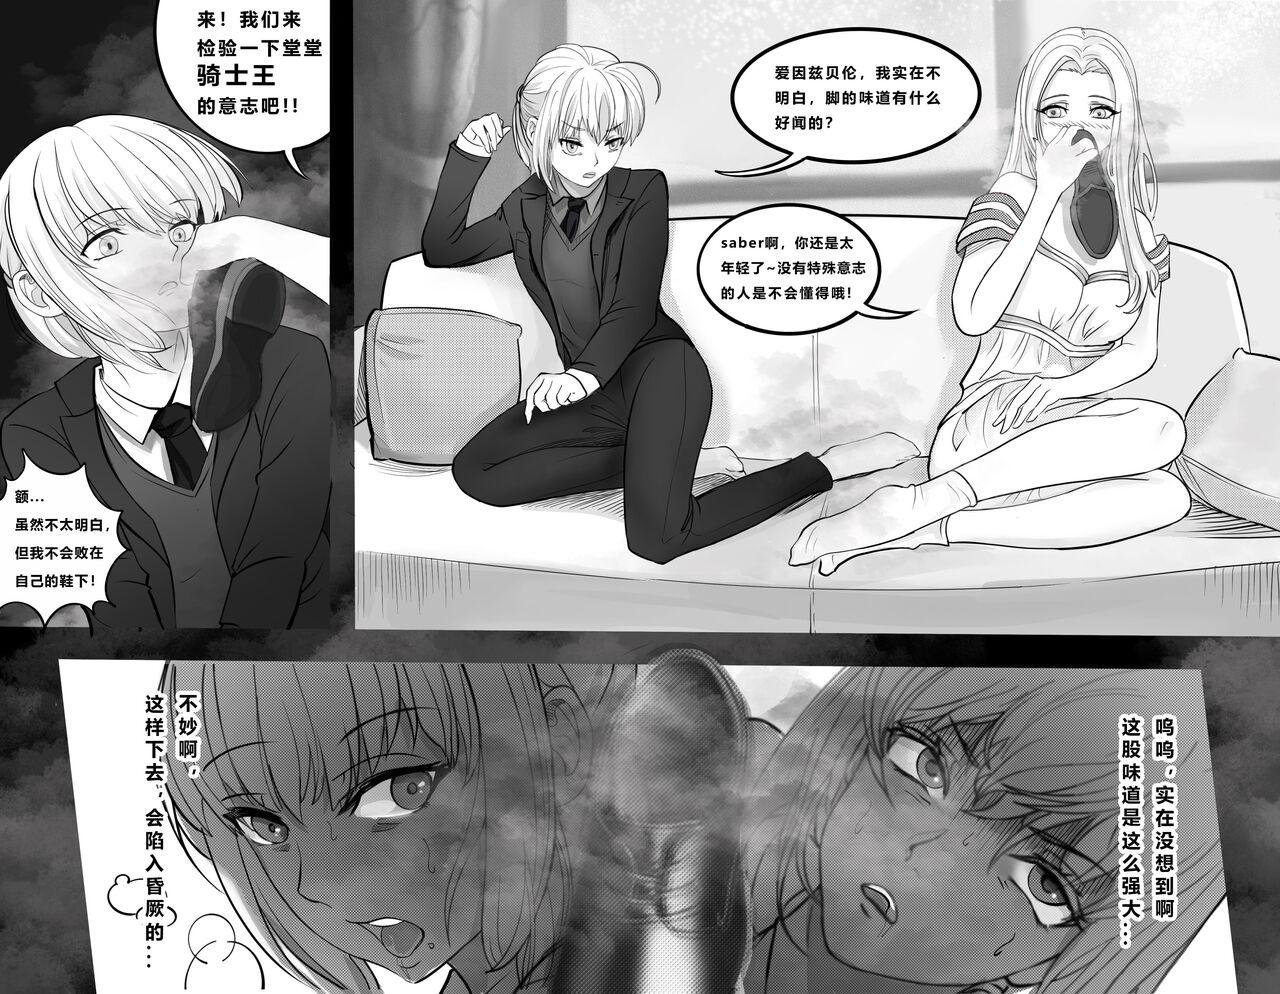 Whipping FATE REQUEST CHINESE VERSION - Fate stay night Big Black Dick - Page 3